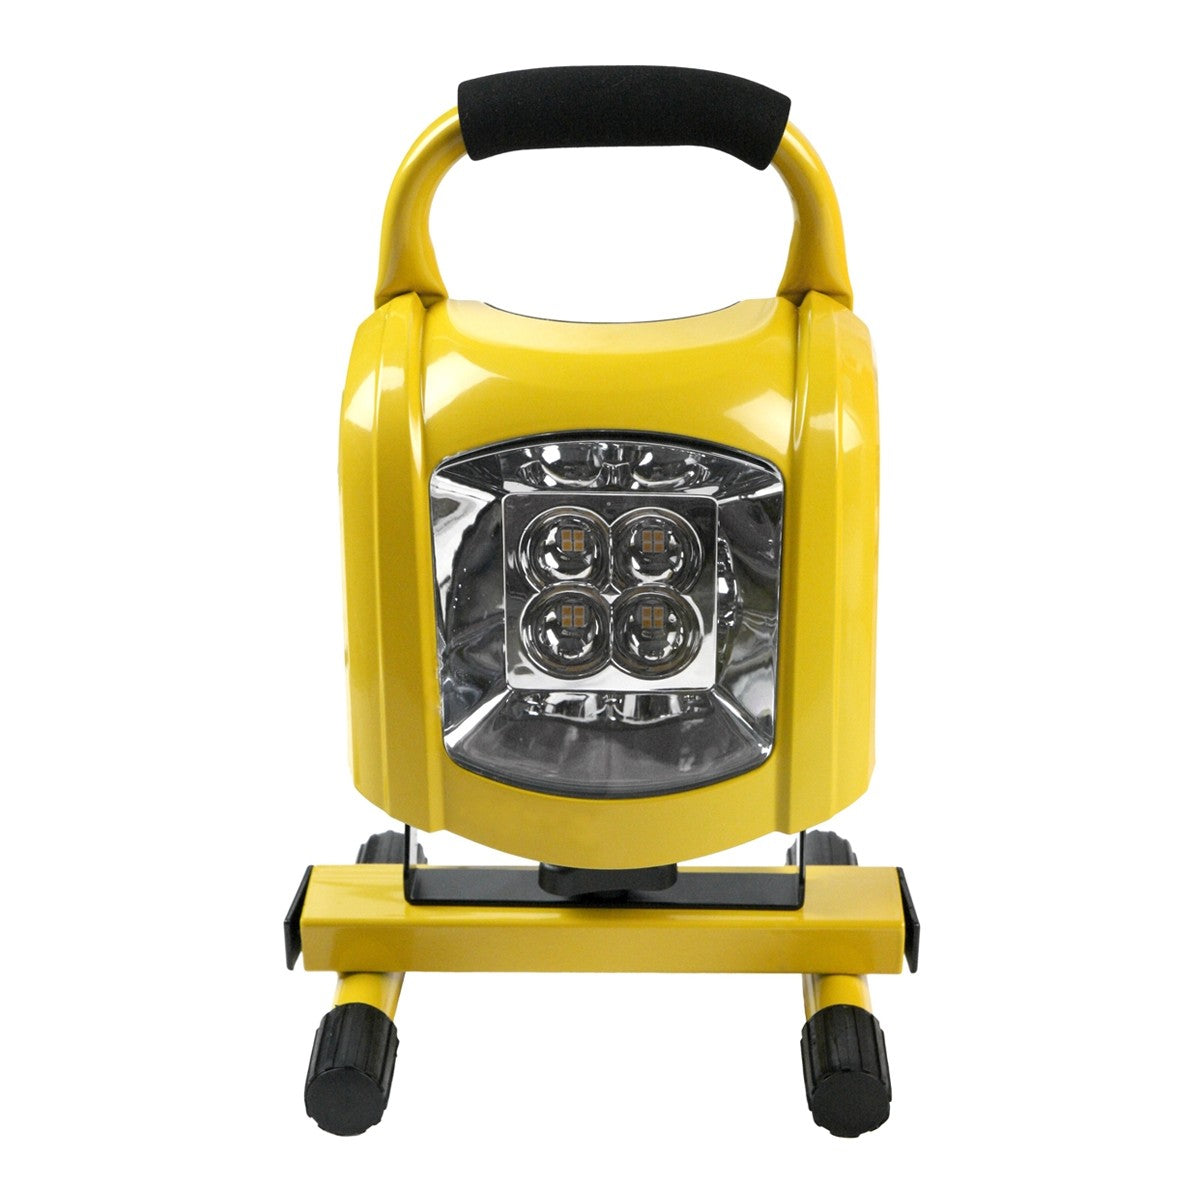 Front of indoor LED worklight on stand showing the padded black handle.